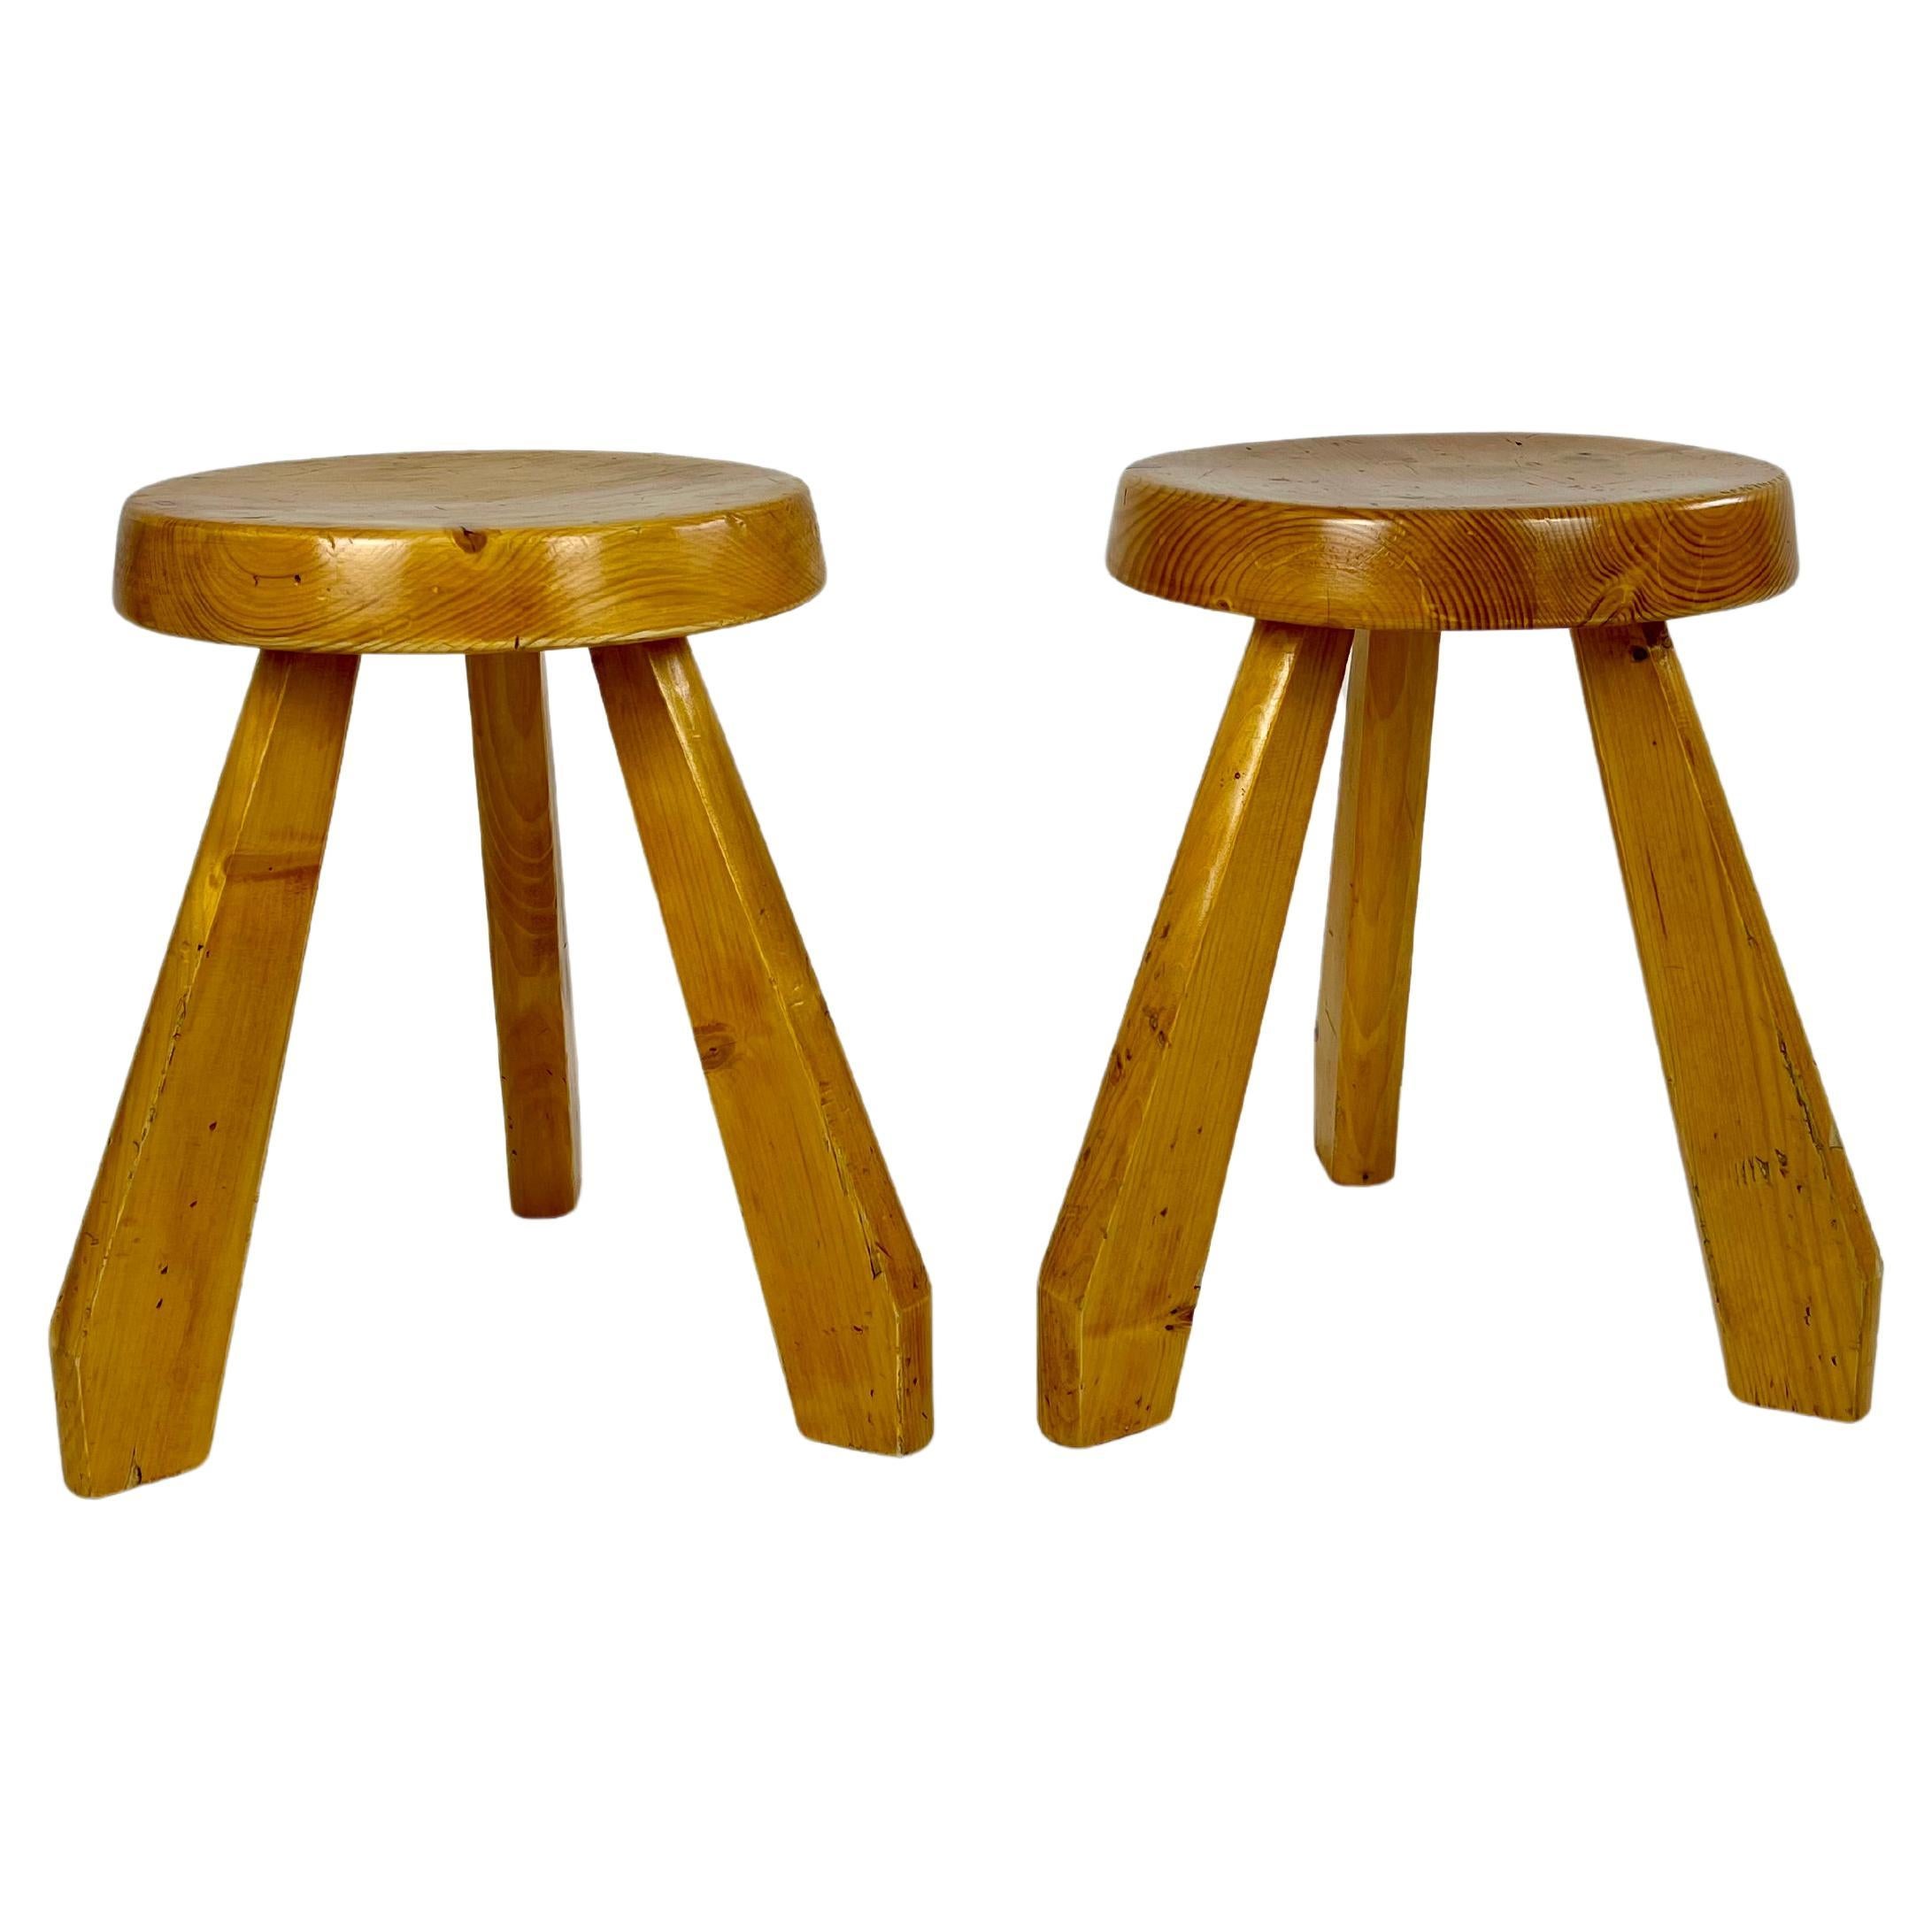 Pair of pine stools from Les Arcs, Charlotte Perriand, France 1960-70s For Sale